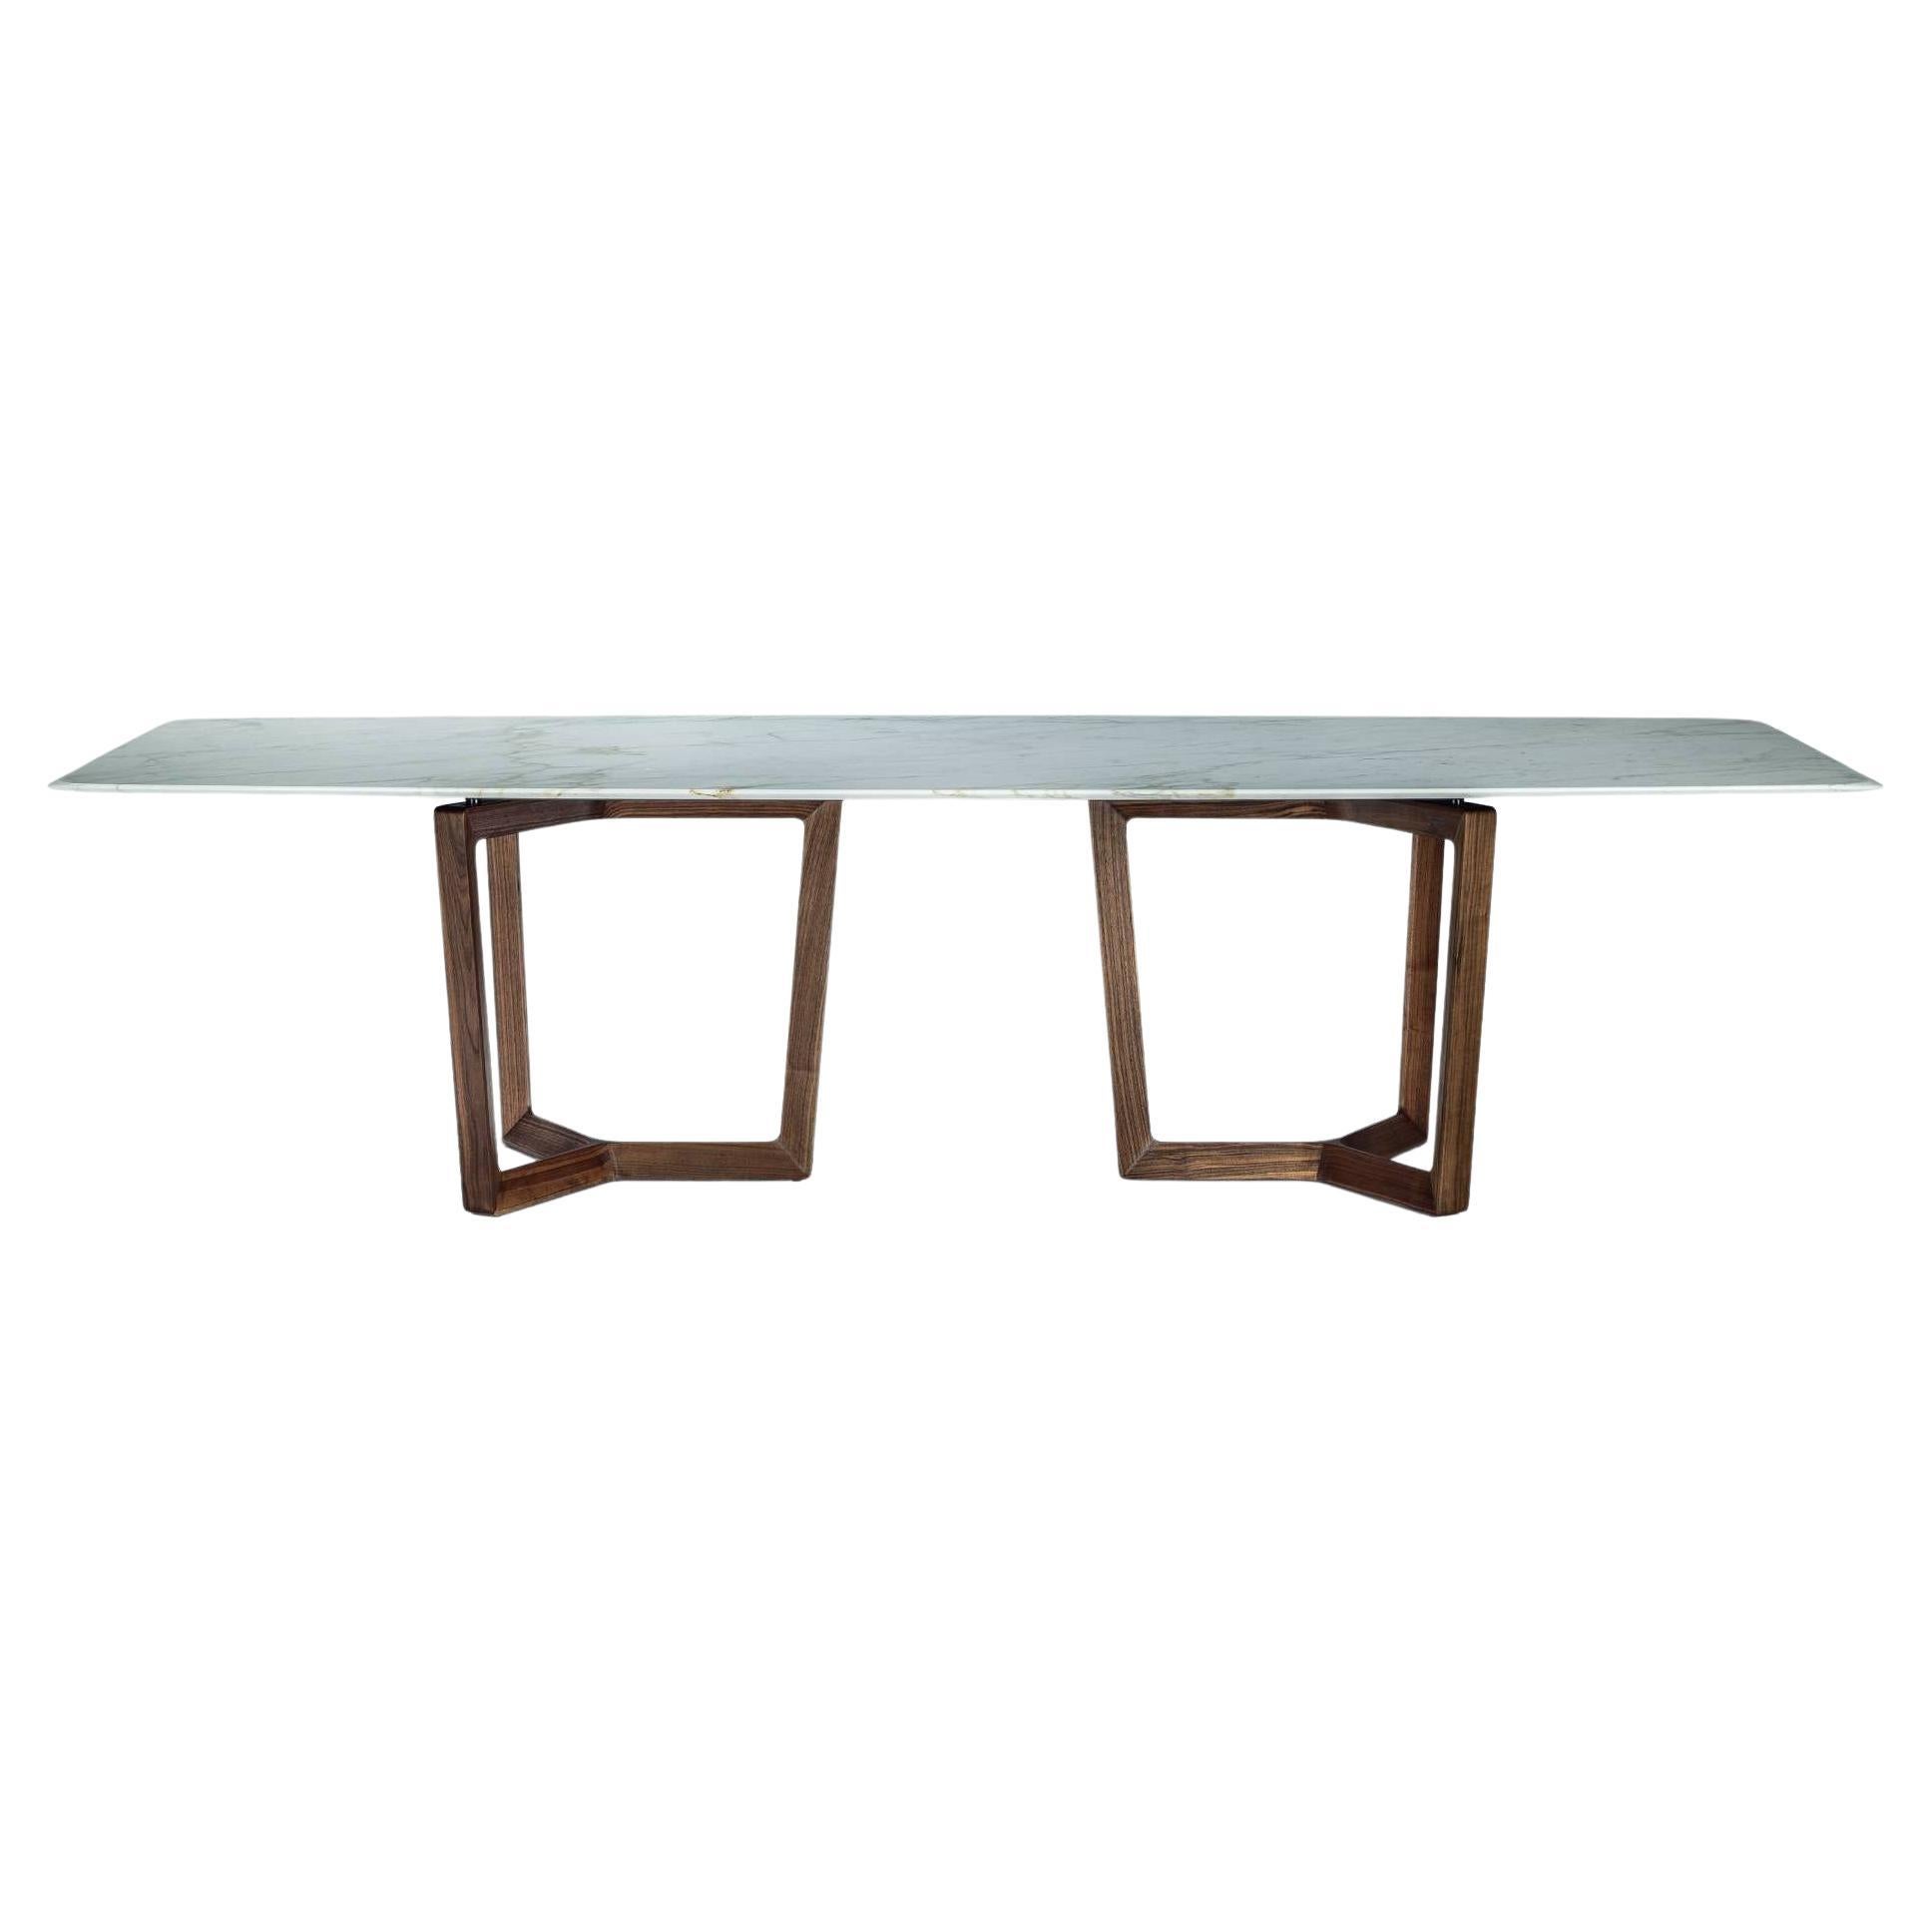 Bolero Ravel Table Marble Calacatta Gold Top Solid Canaletto Walnut Structure